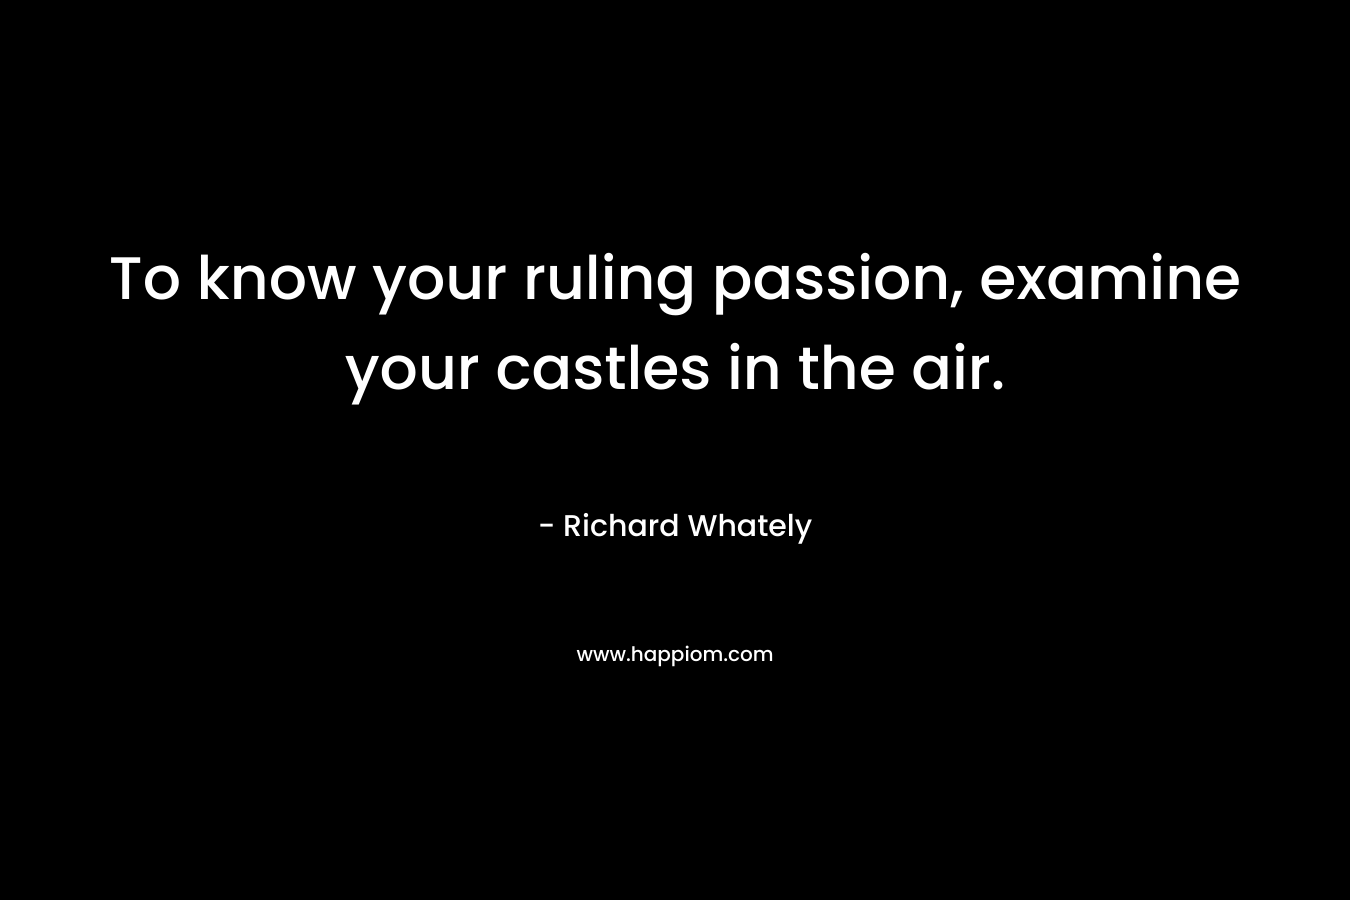 To know your ruling passion, examine your castles in the air.